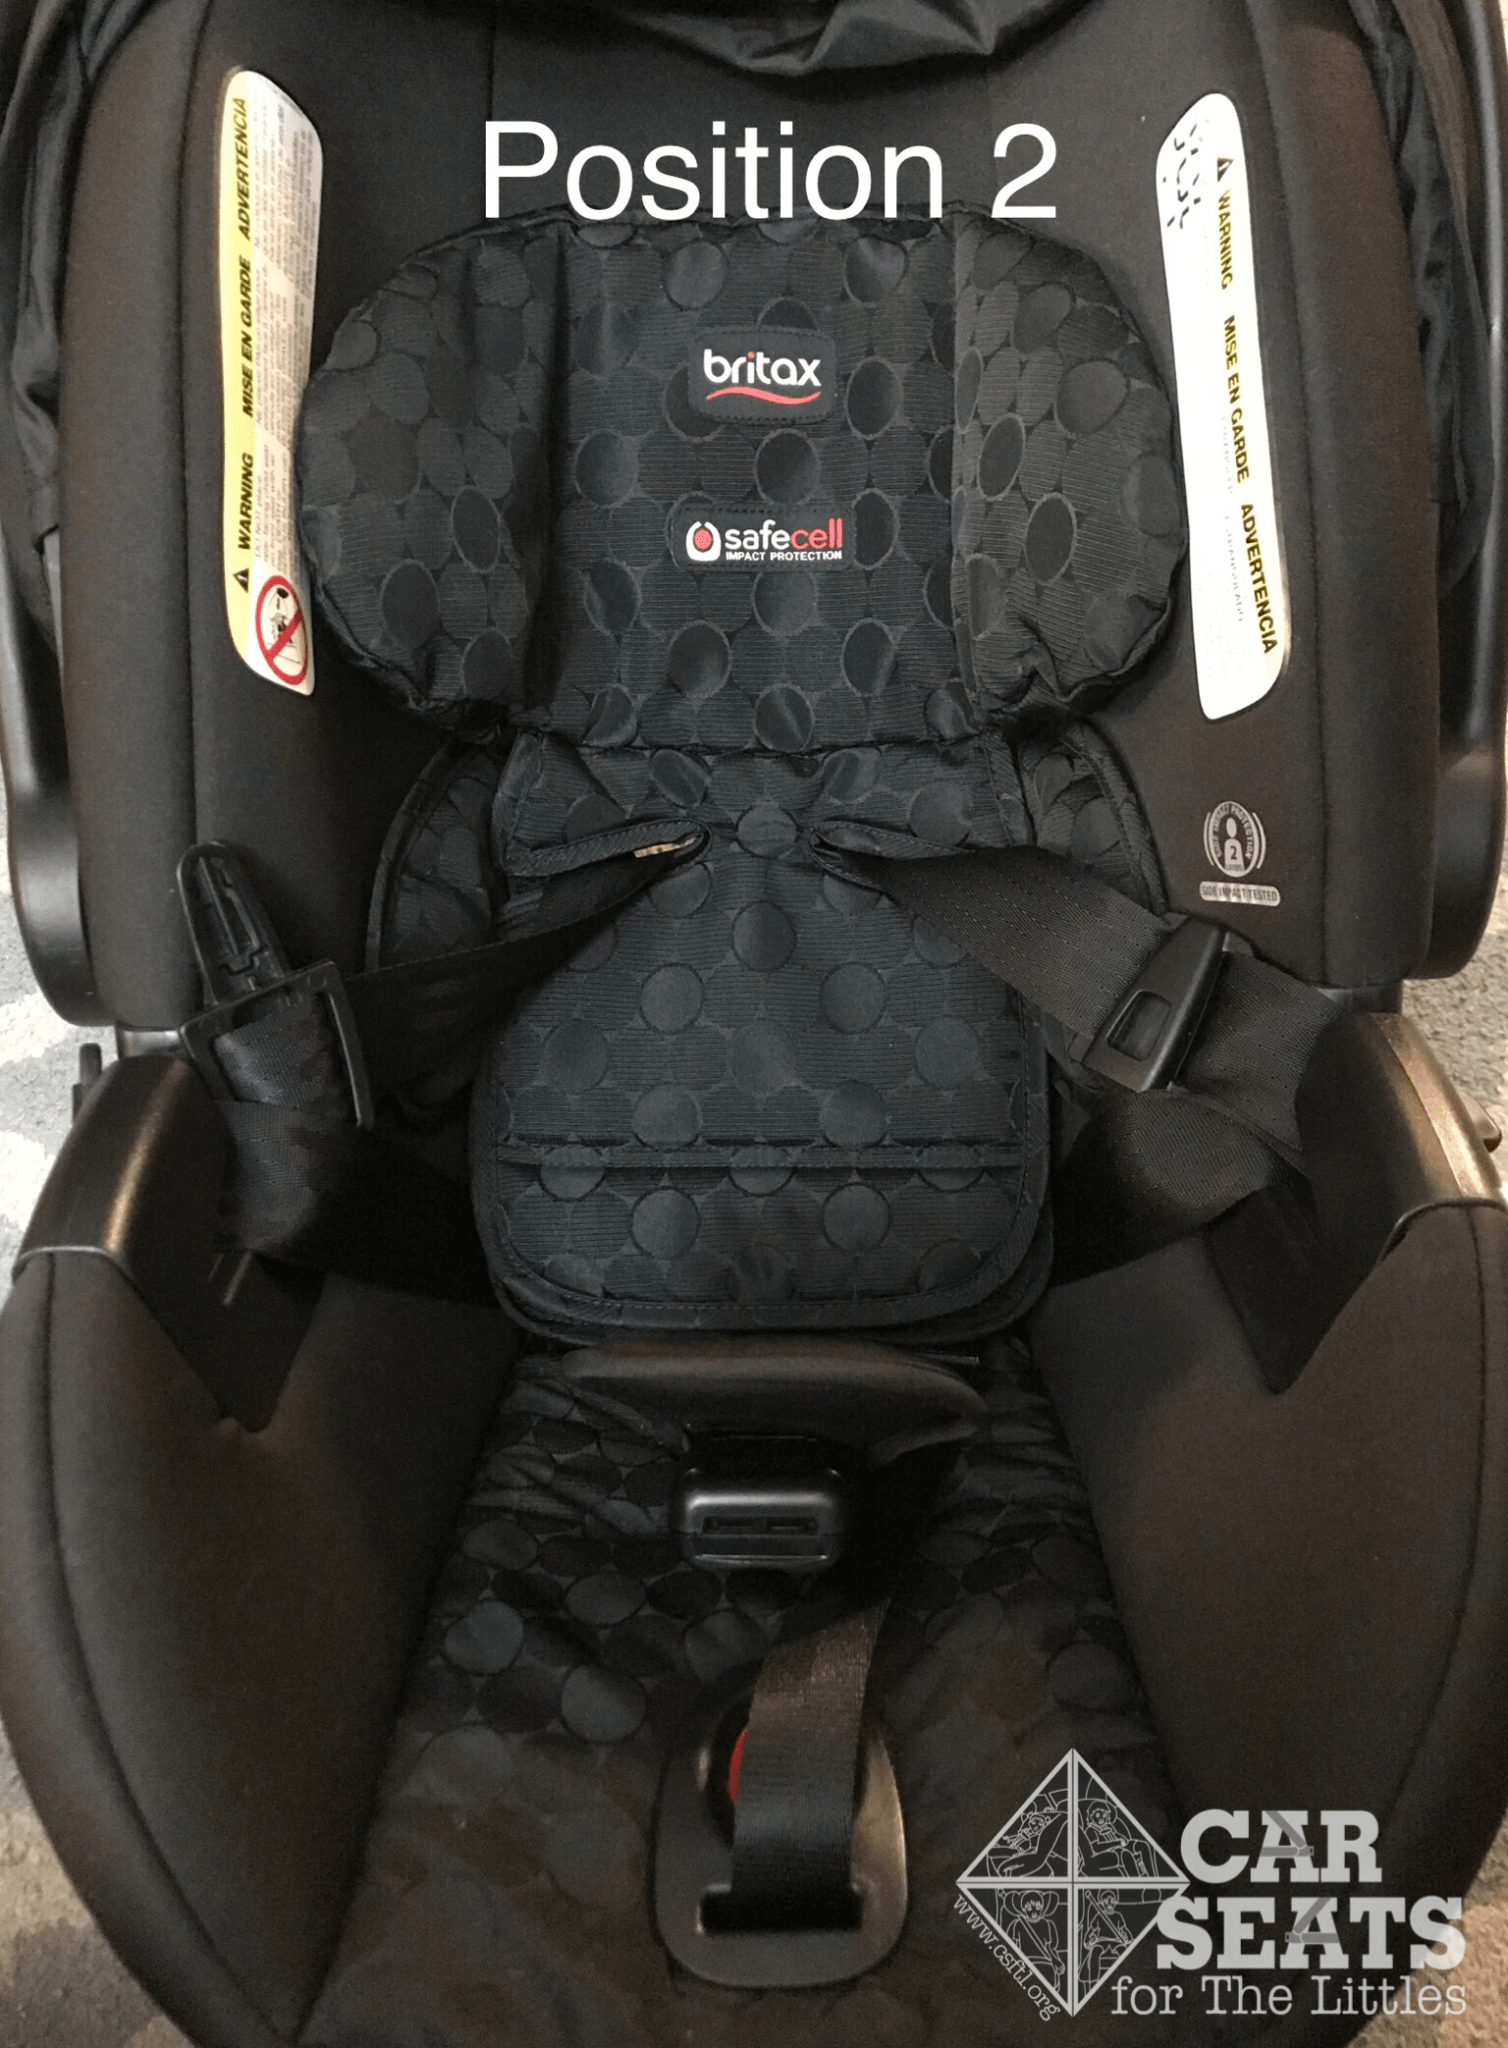 Britax Endeavours Review Car Seats For The Littles - How Long To Use Infant Insert In Britax Car Seat